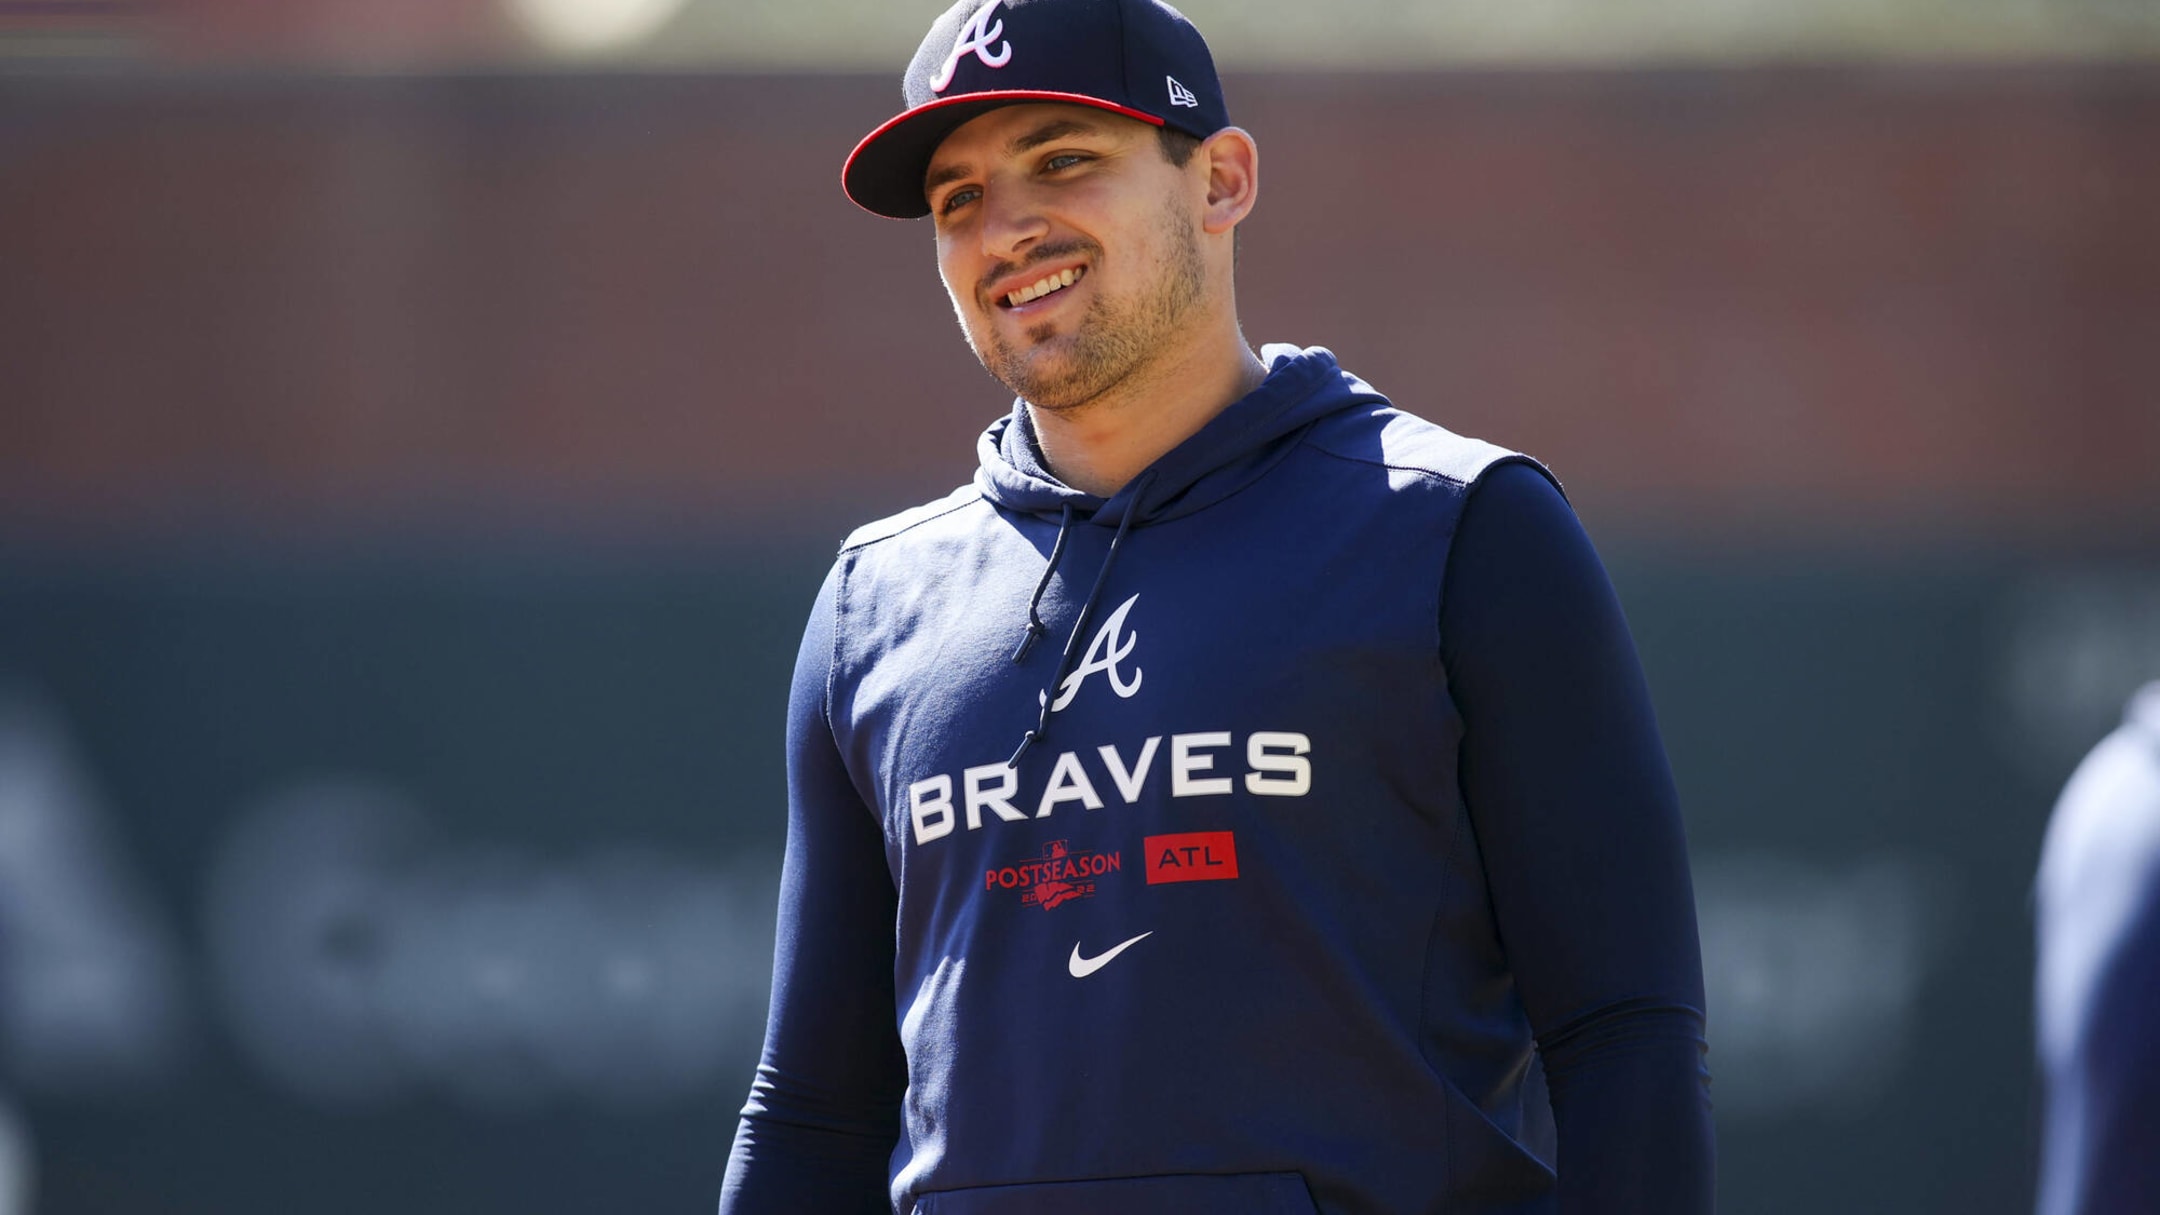 Predicting the stats of each Braves player — Austin Riley